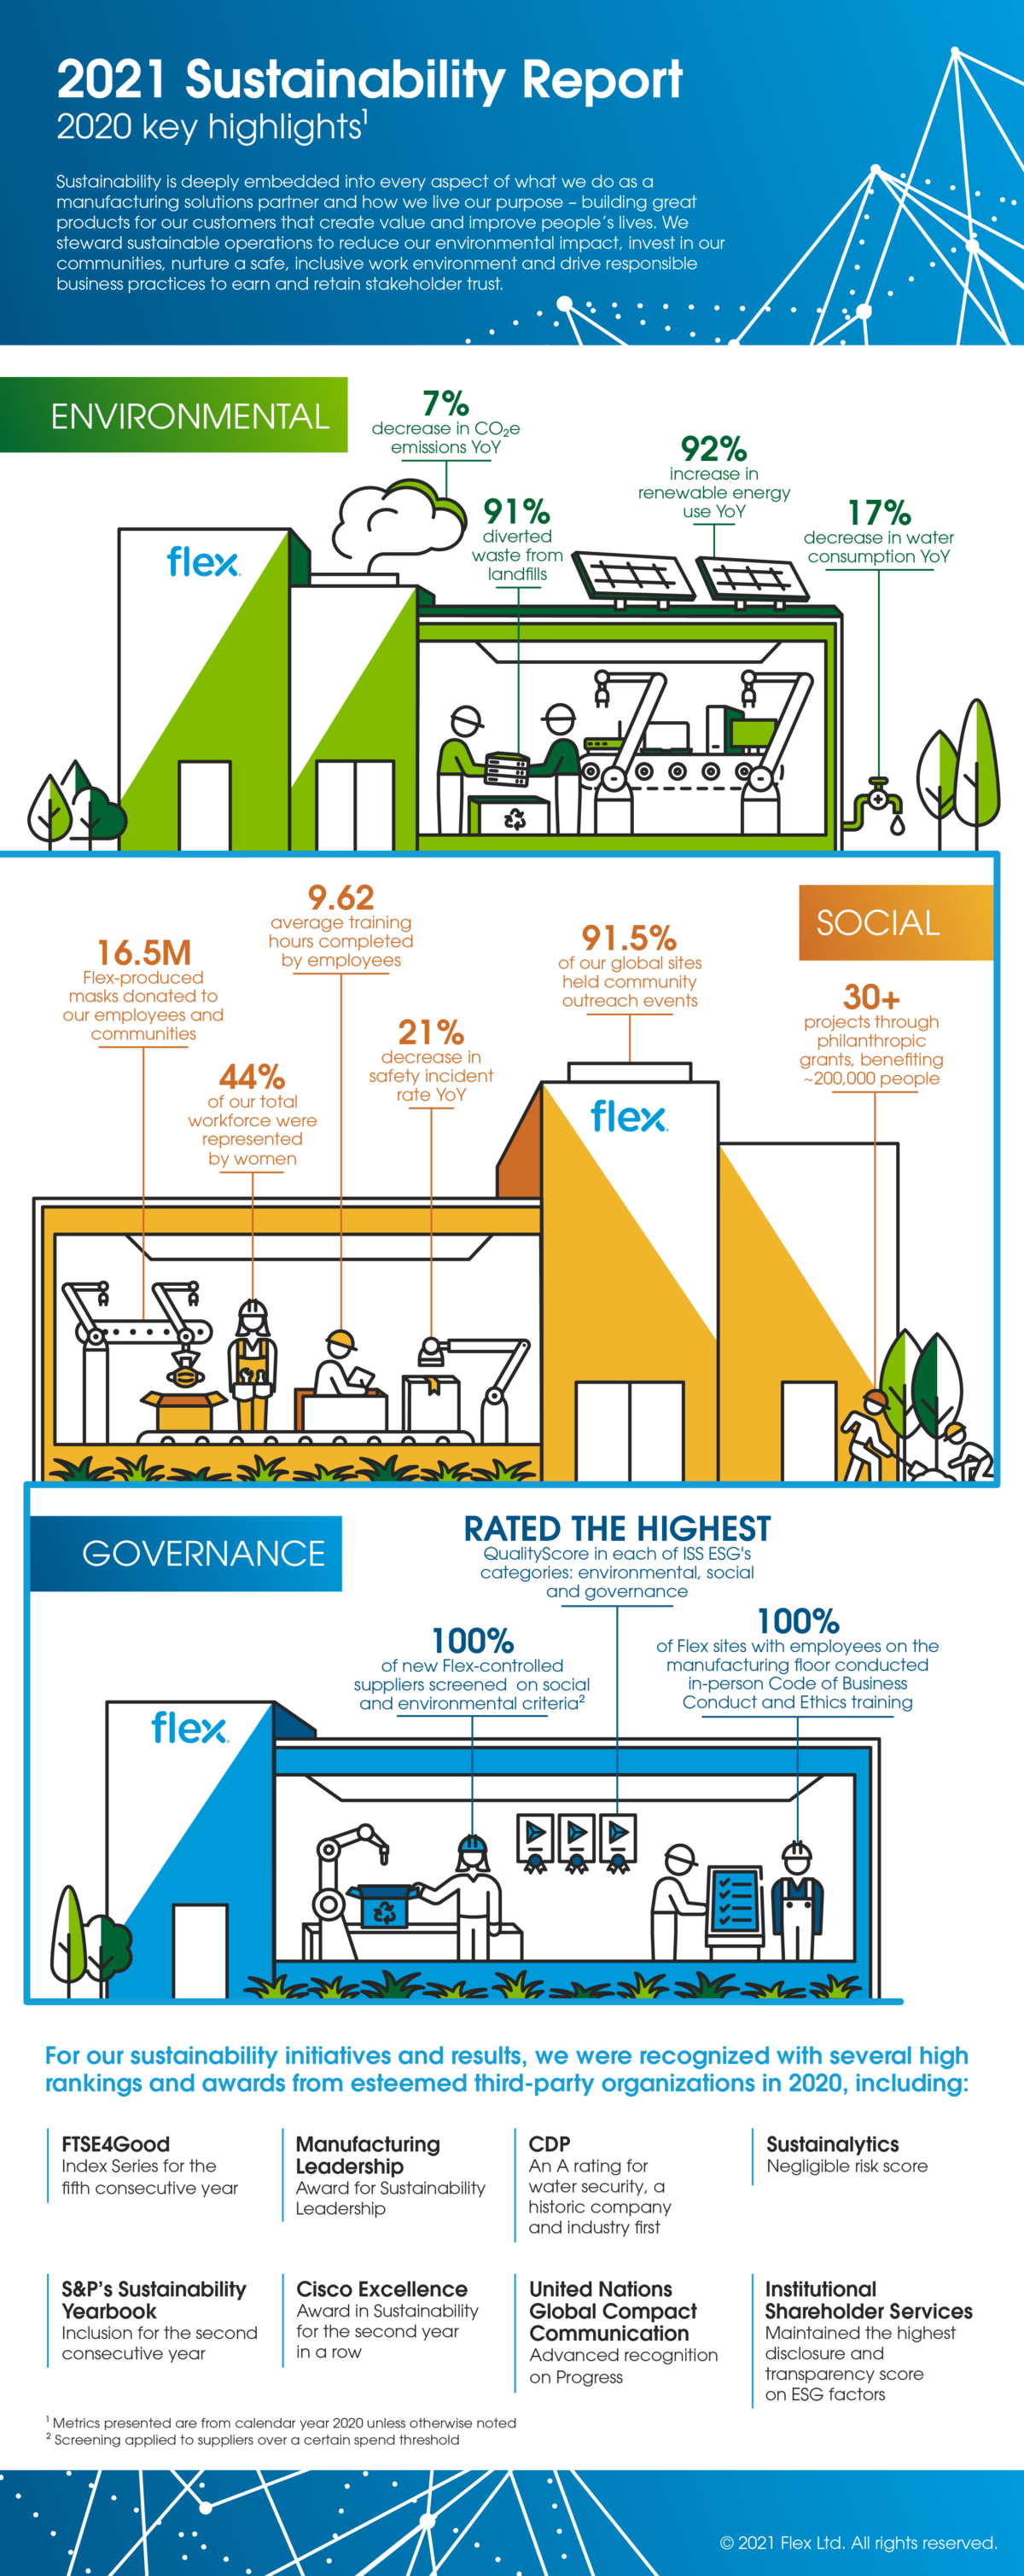 2021 sustainability report infographic